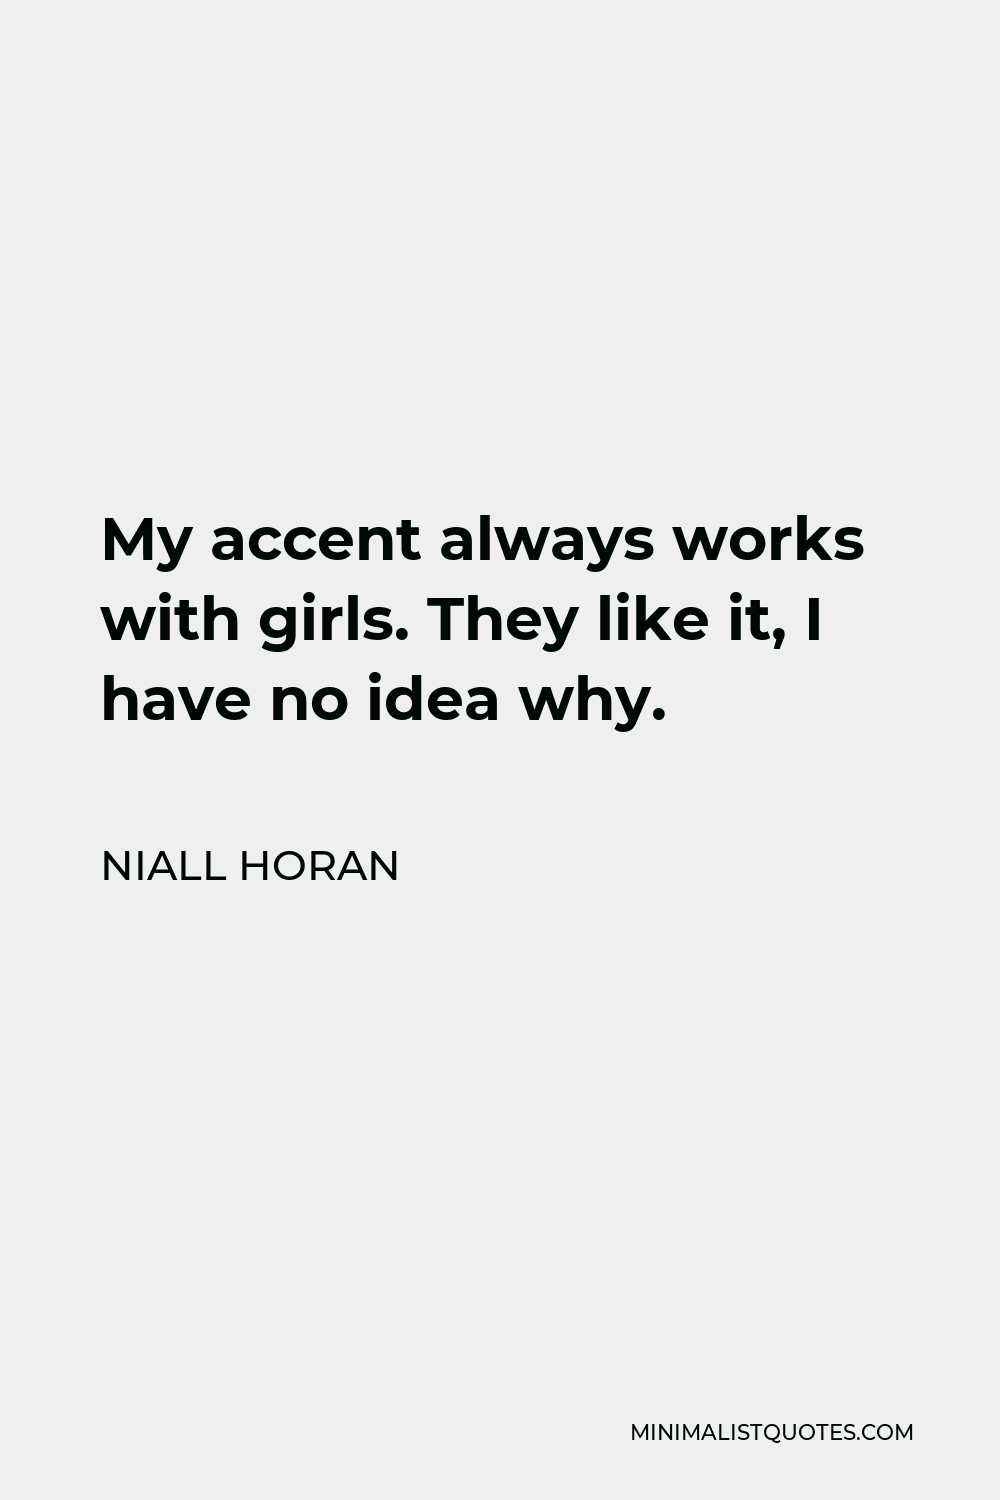 Niall Horan Quote - My accent always works with girls. They like it, I have no idea why.